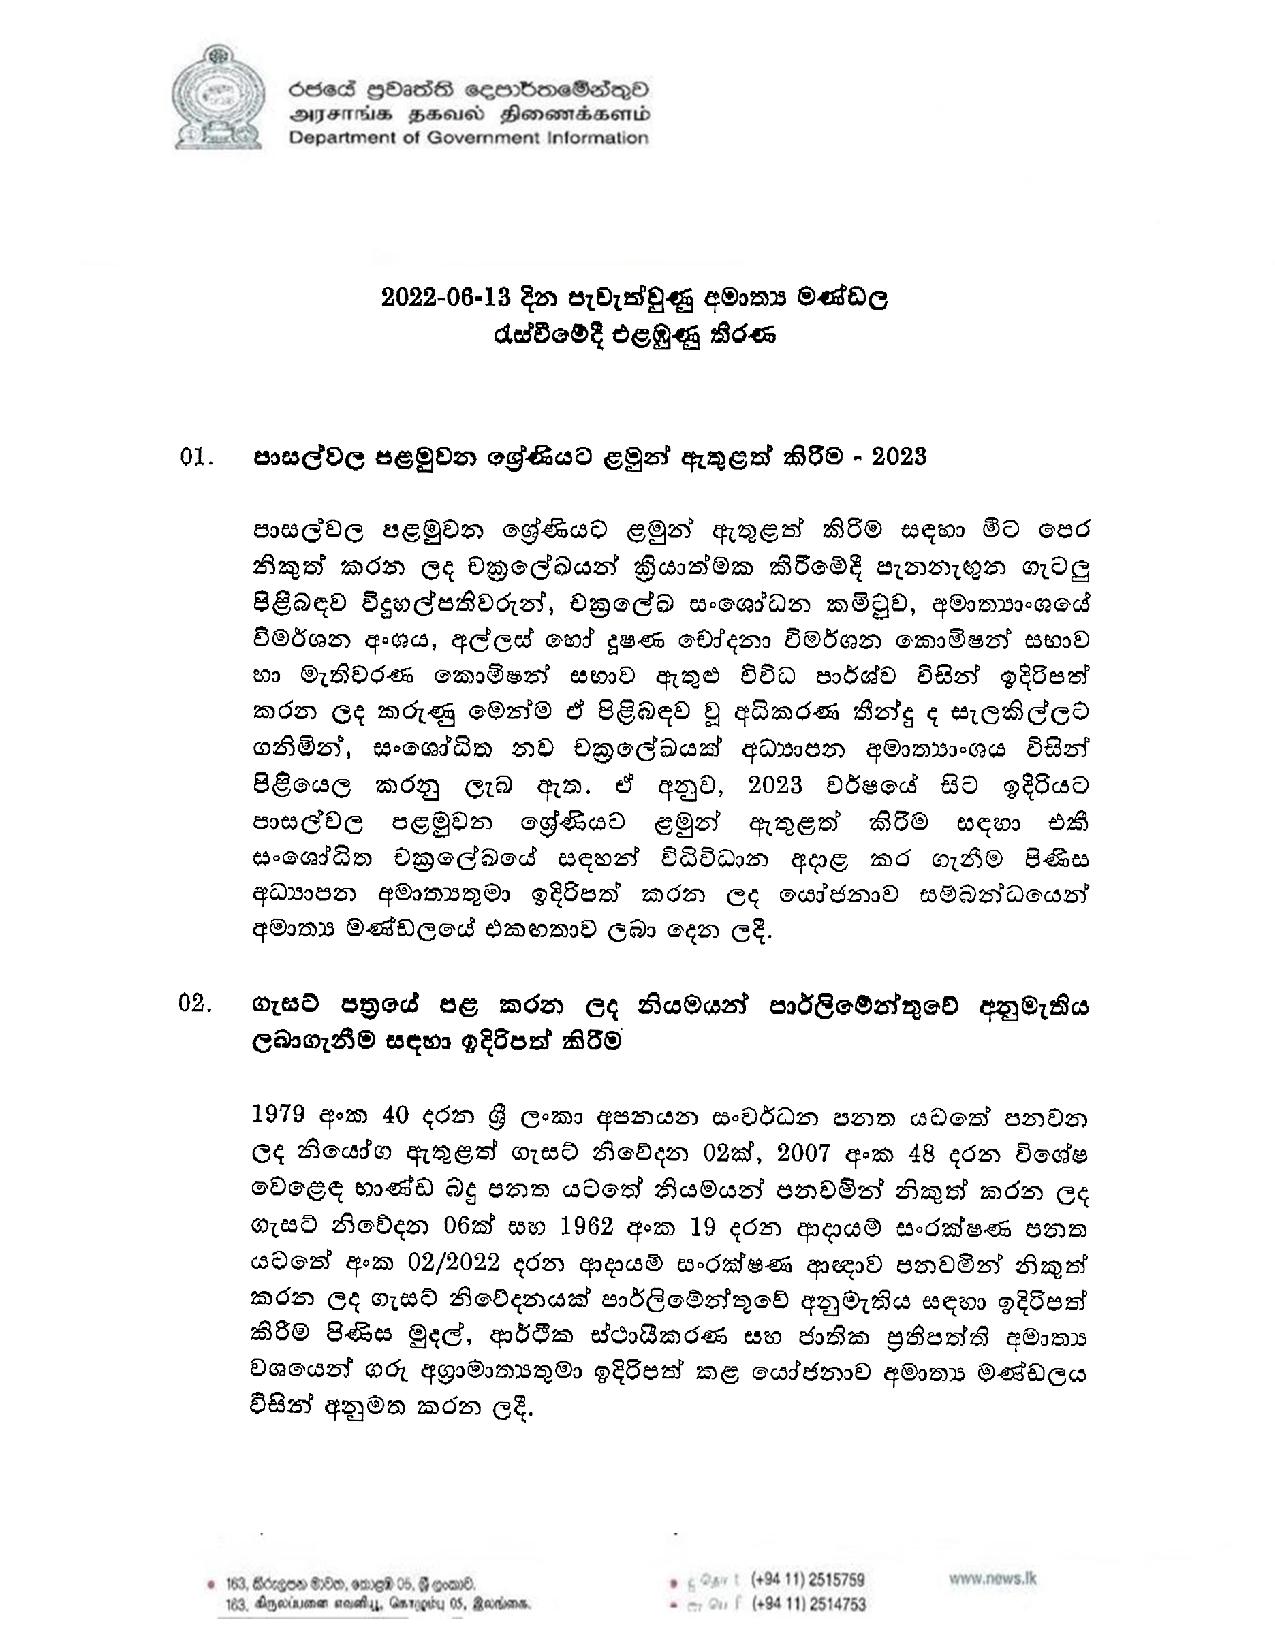 Cabinet Decision on 13.06.2022 page 001